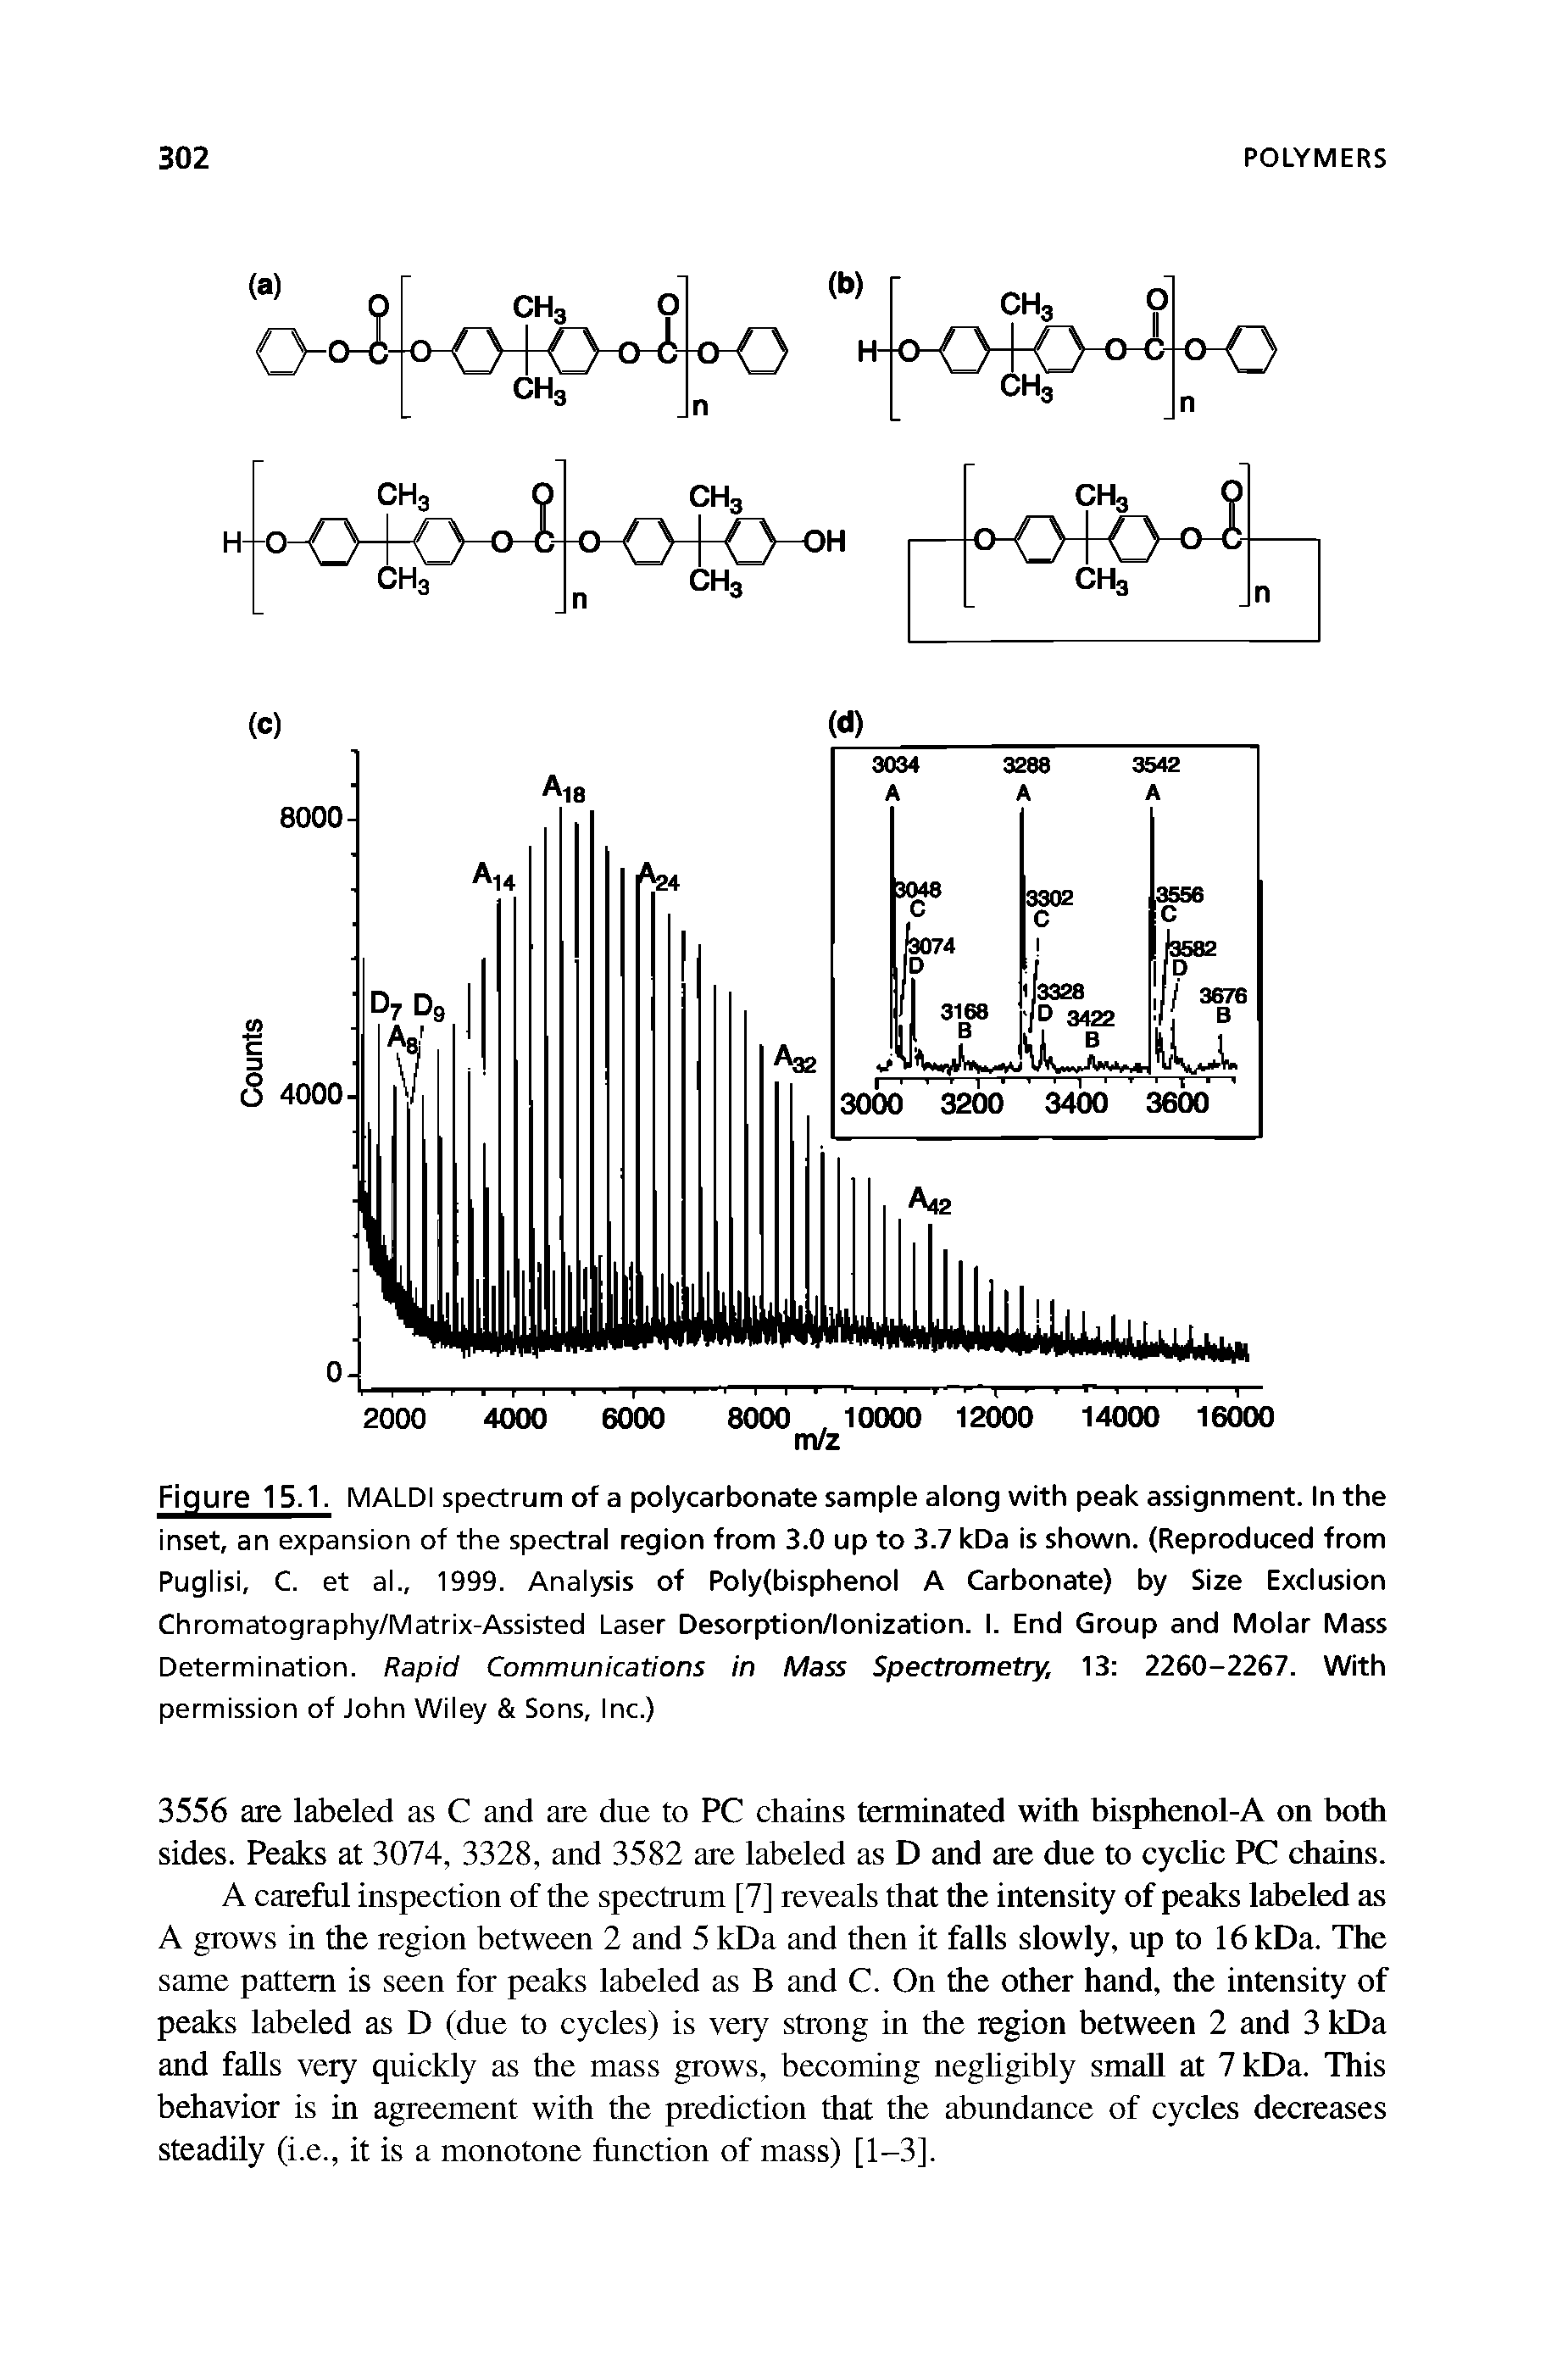 Figure 15.1. MALDI spectrum of a polycarbonate sample along with peak assignment. In the inset, an expansion of the spectral region from 3.0 up to 3.7 kDa is shown. (Reproduced from Puglisi, C. et al., 1999. Analysis of Poly(bisphenol A Carbonate) by Size Exclusion Chromatography/Matrix-Assisted Laser Desorption/lonization. I. End Group and Molar Mass Determination. Rapid Communications in Mass Spectrometry, 13 2260-2267. With permission of John Wiley Sons, Inc.)...